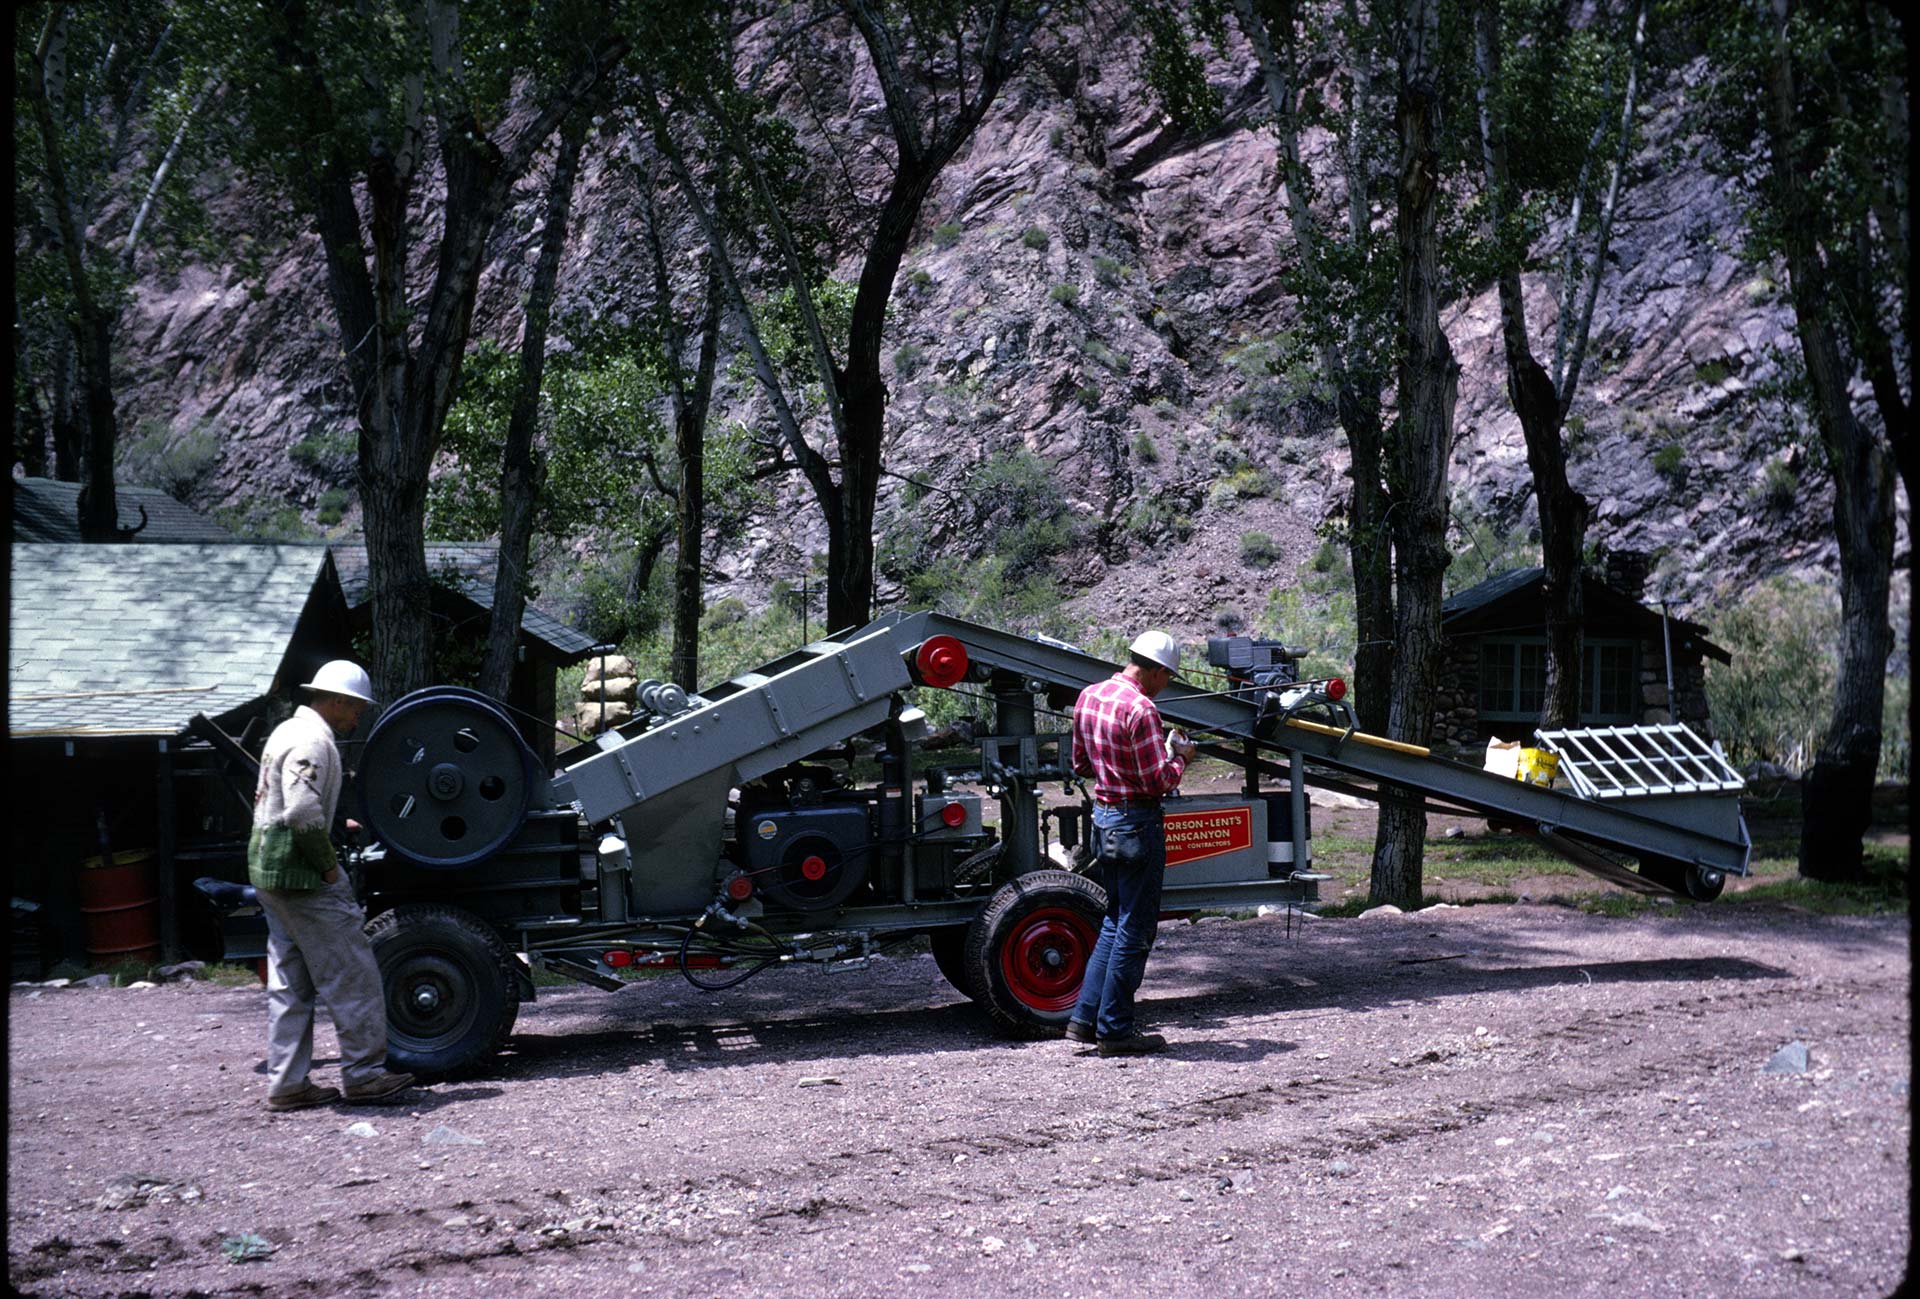 Grand Canyon pipeline historic